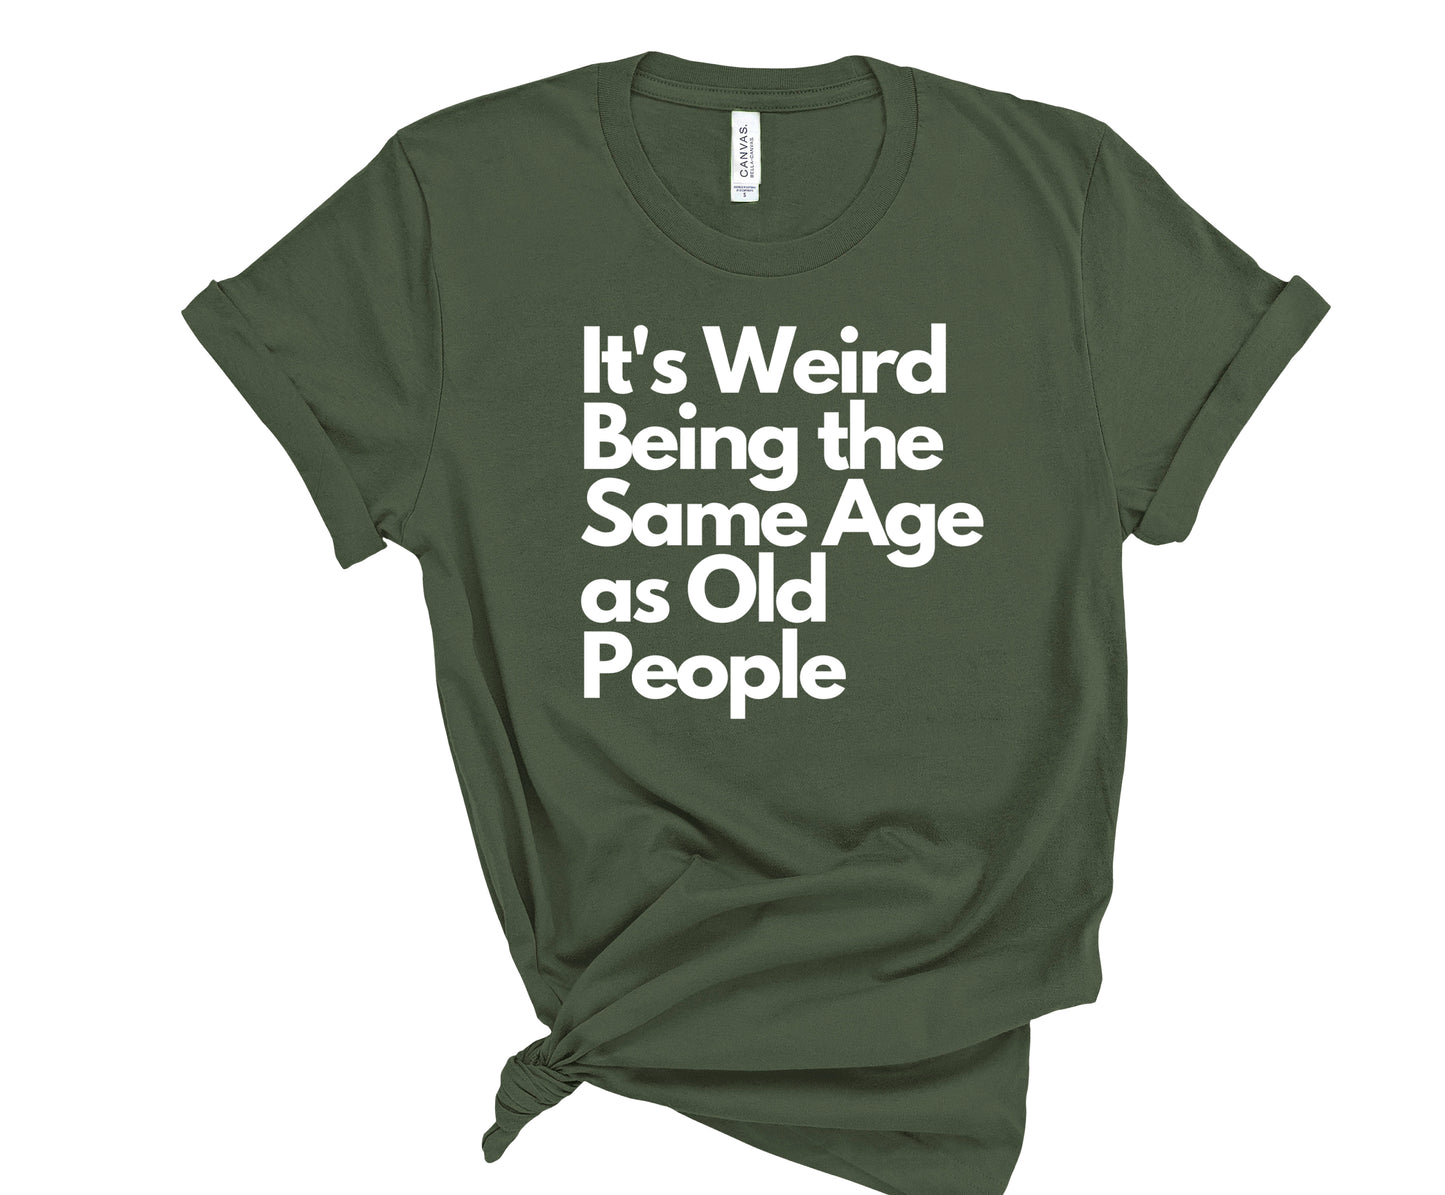 It's Weird Being the Same Age as Old People T-Shirt